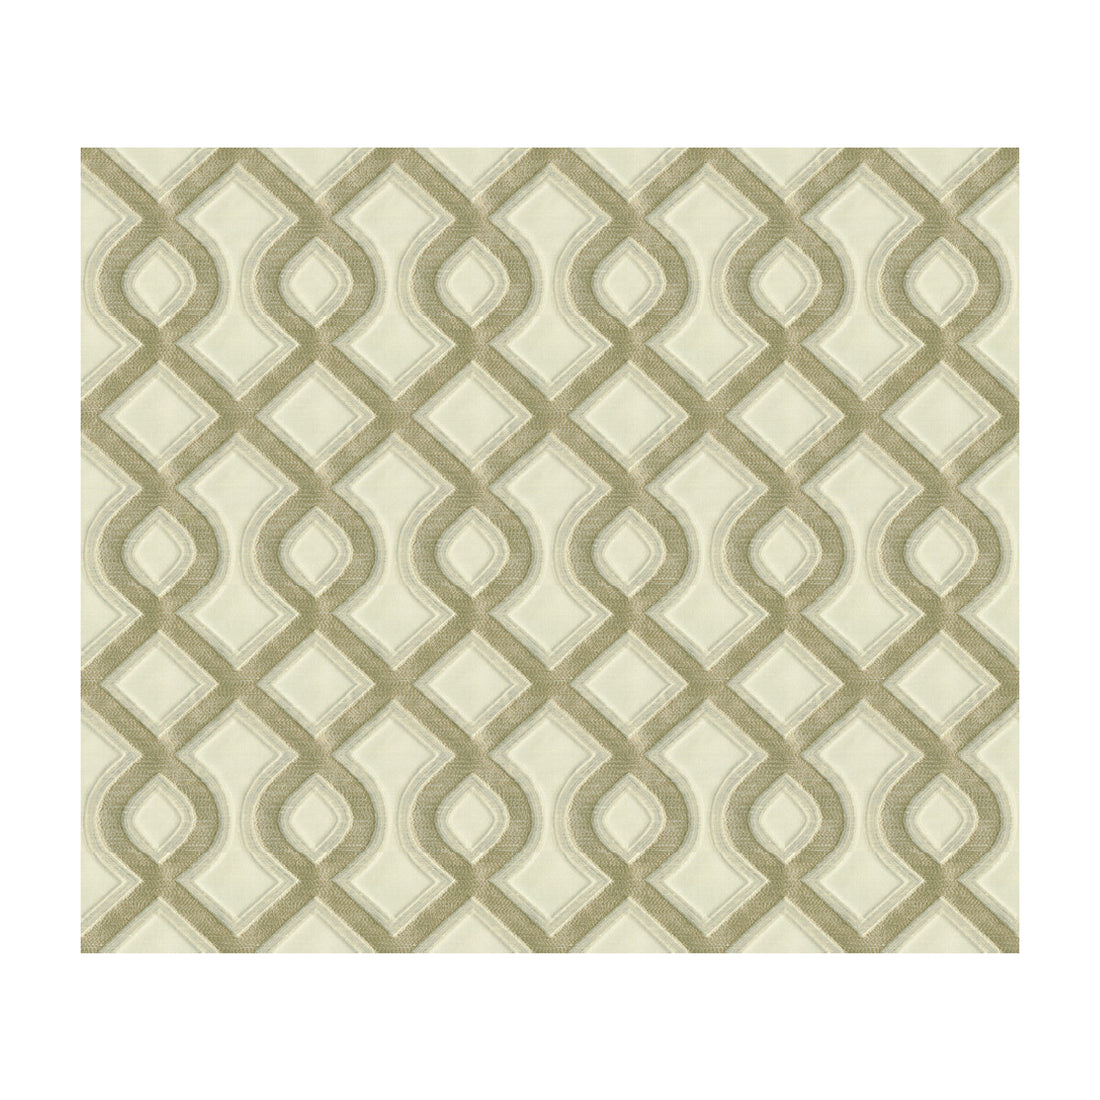 Acclaimed fabric in platinum color - pattern 3967.11.0 - by Kravet Couture in the Modern Luxe collection